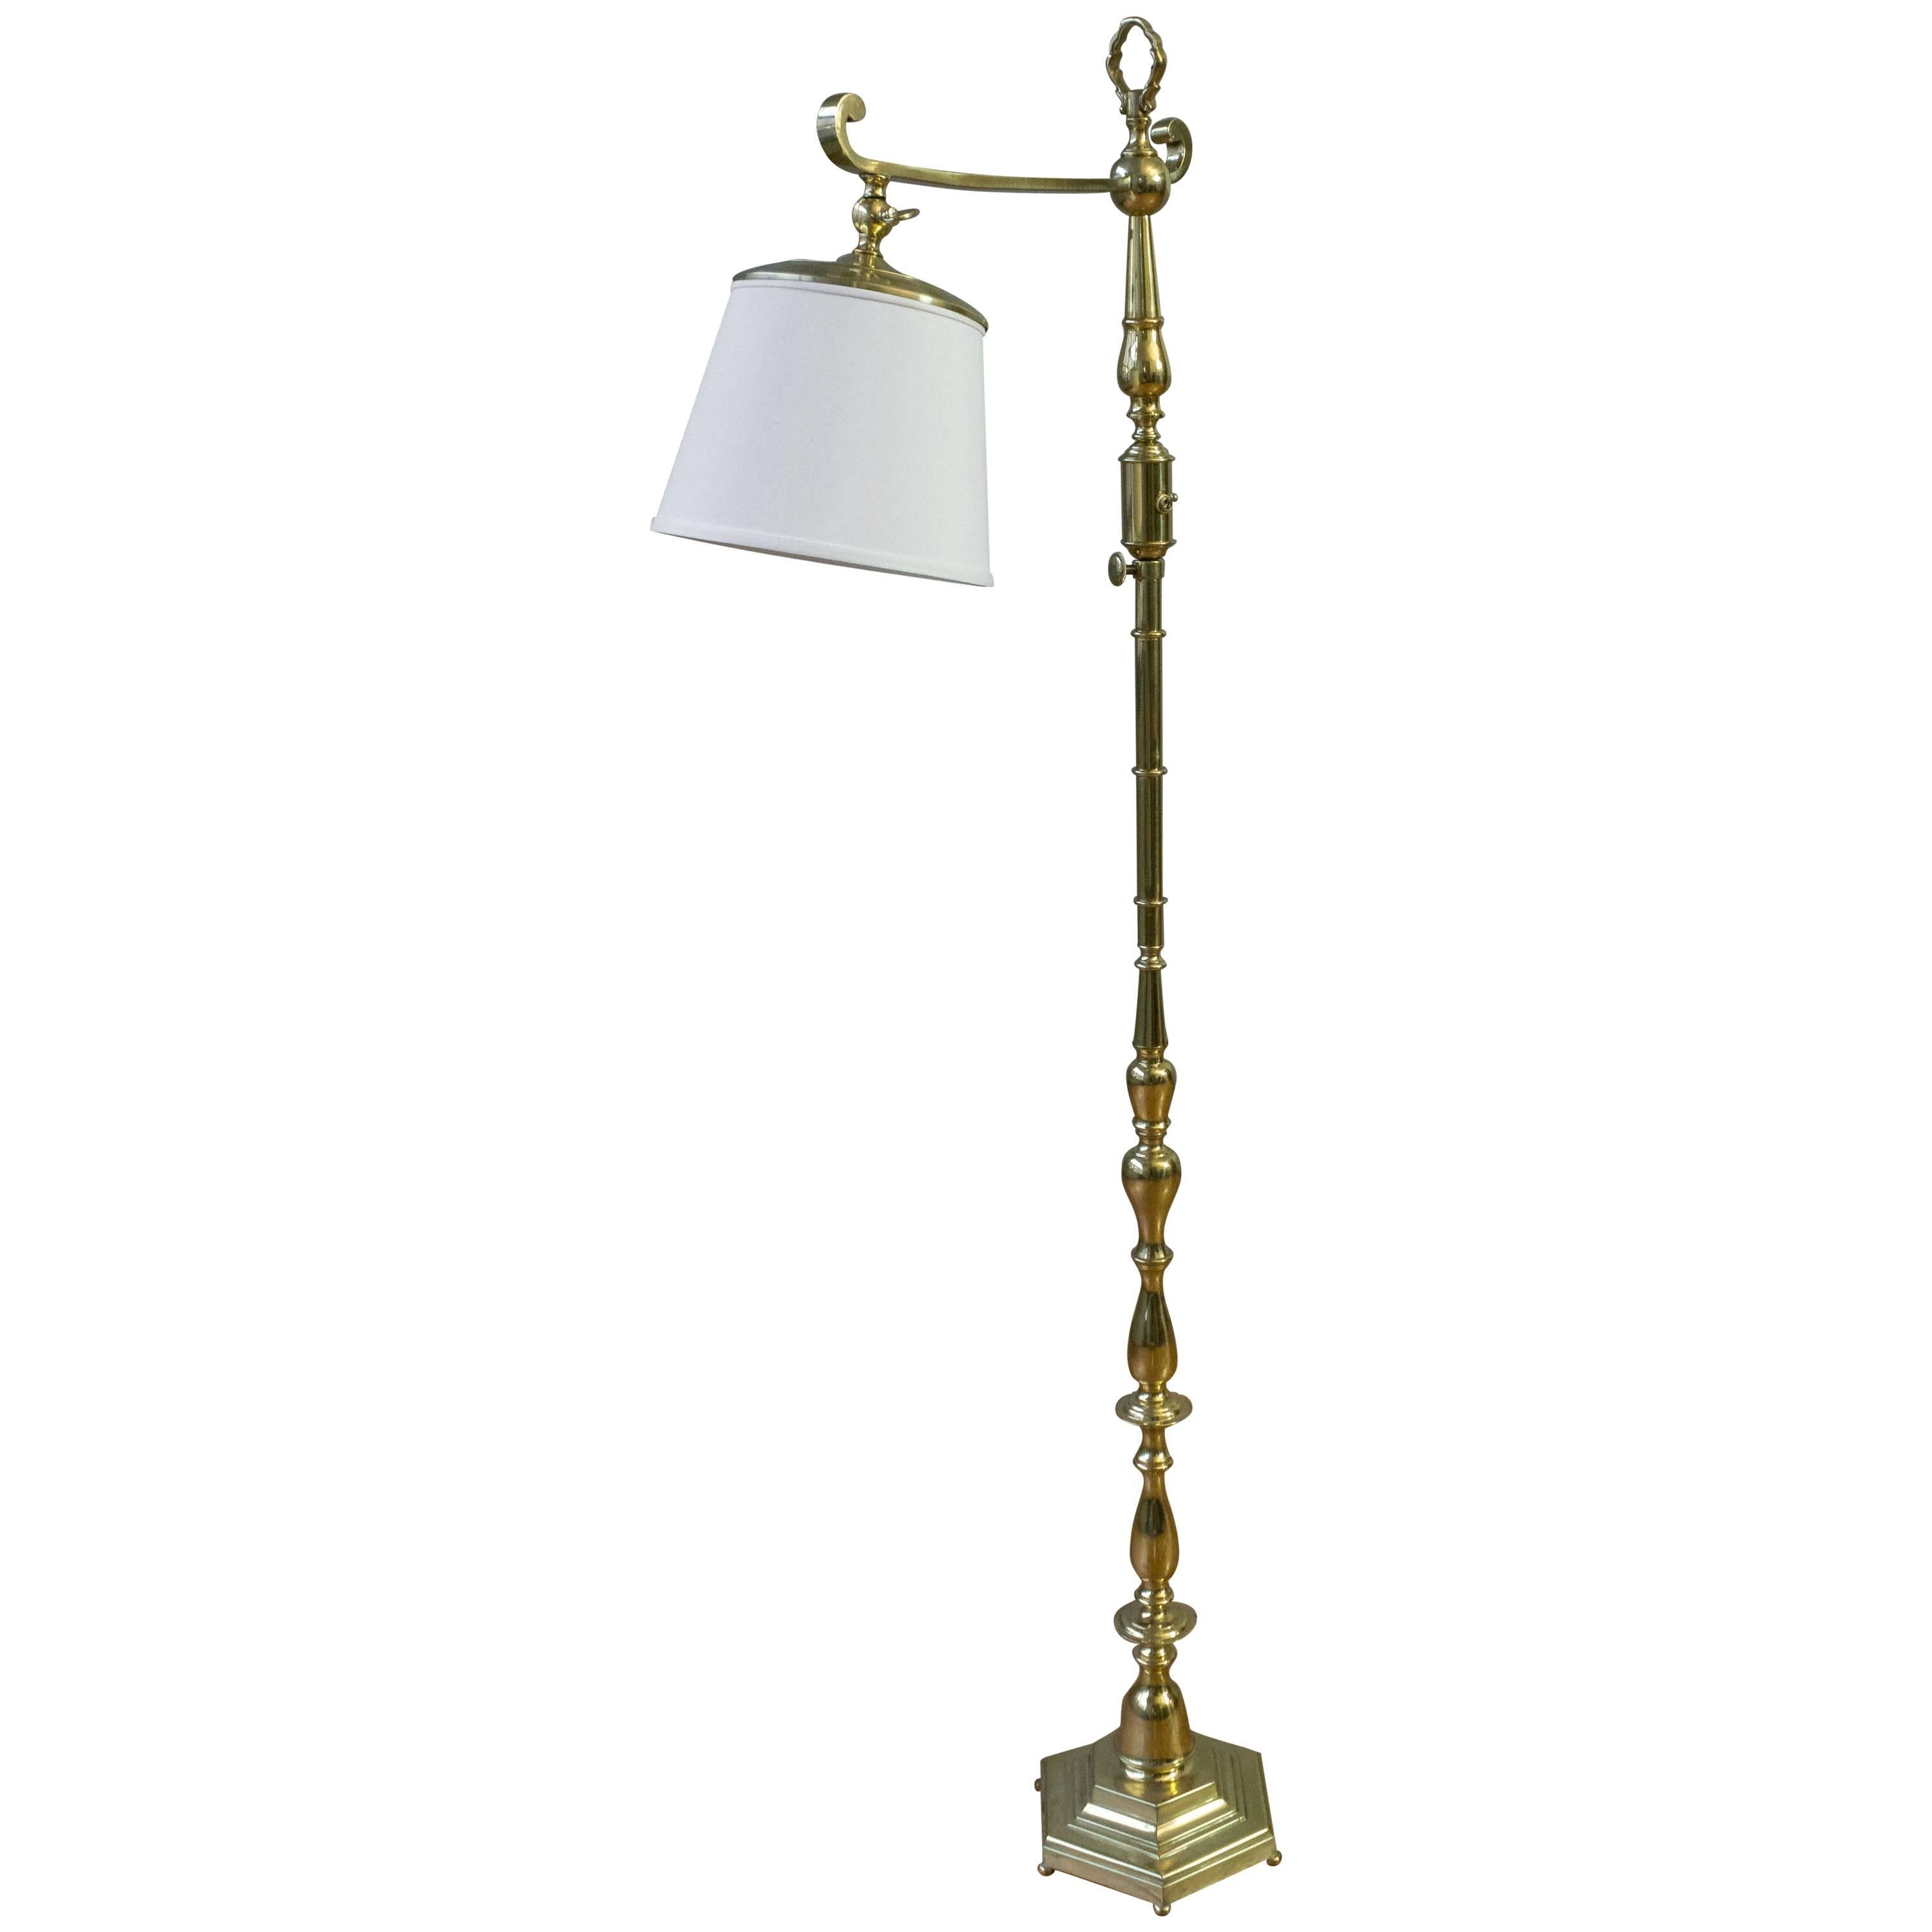 Polished Brass Reading Floor Lamp with an Octagonal Base